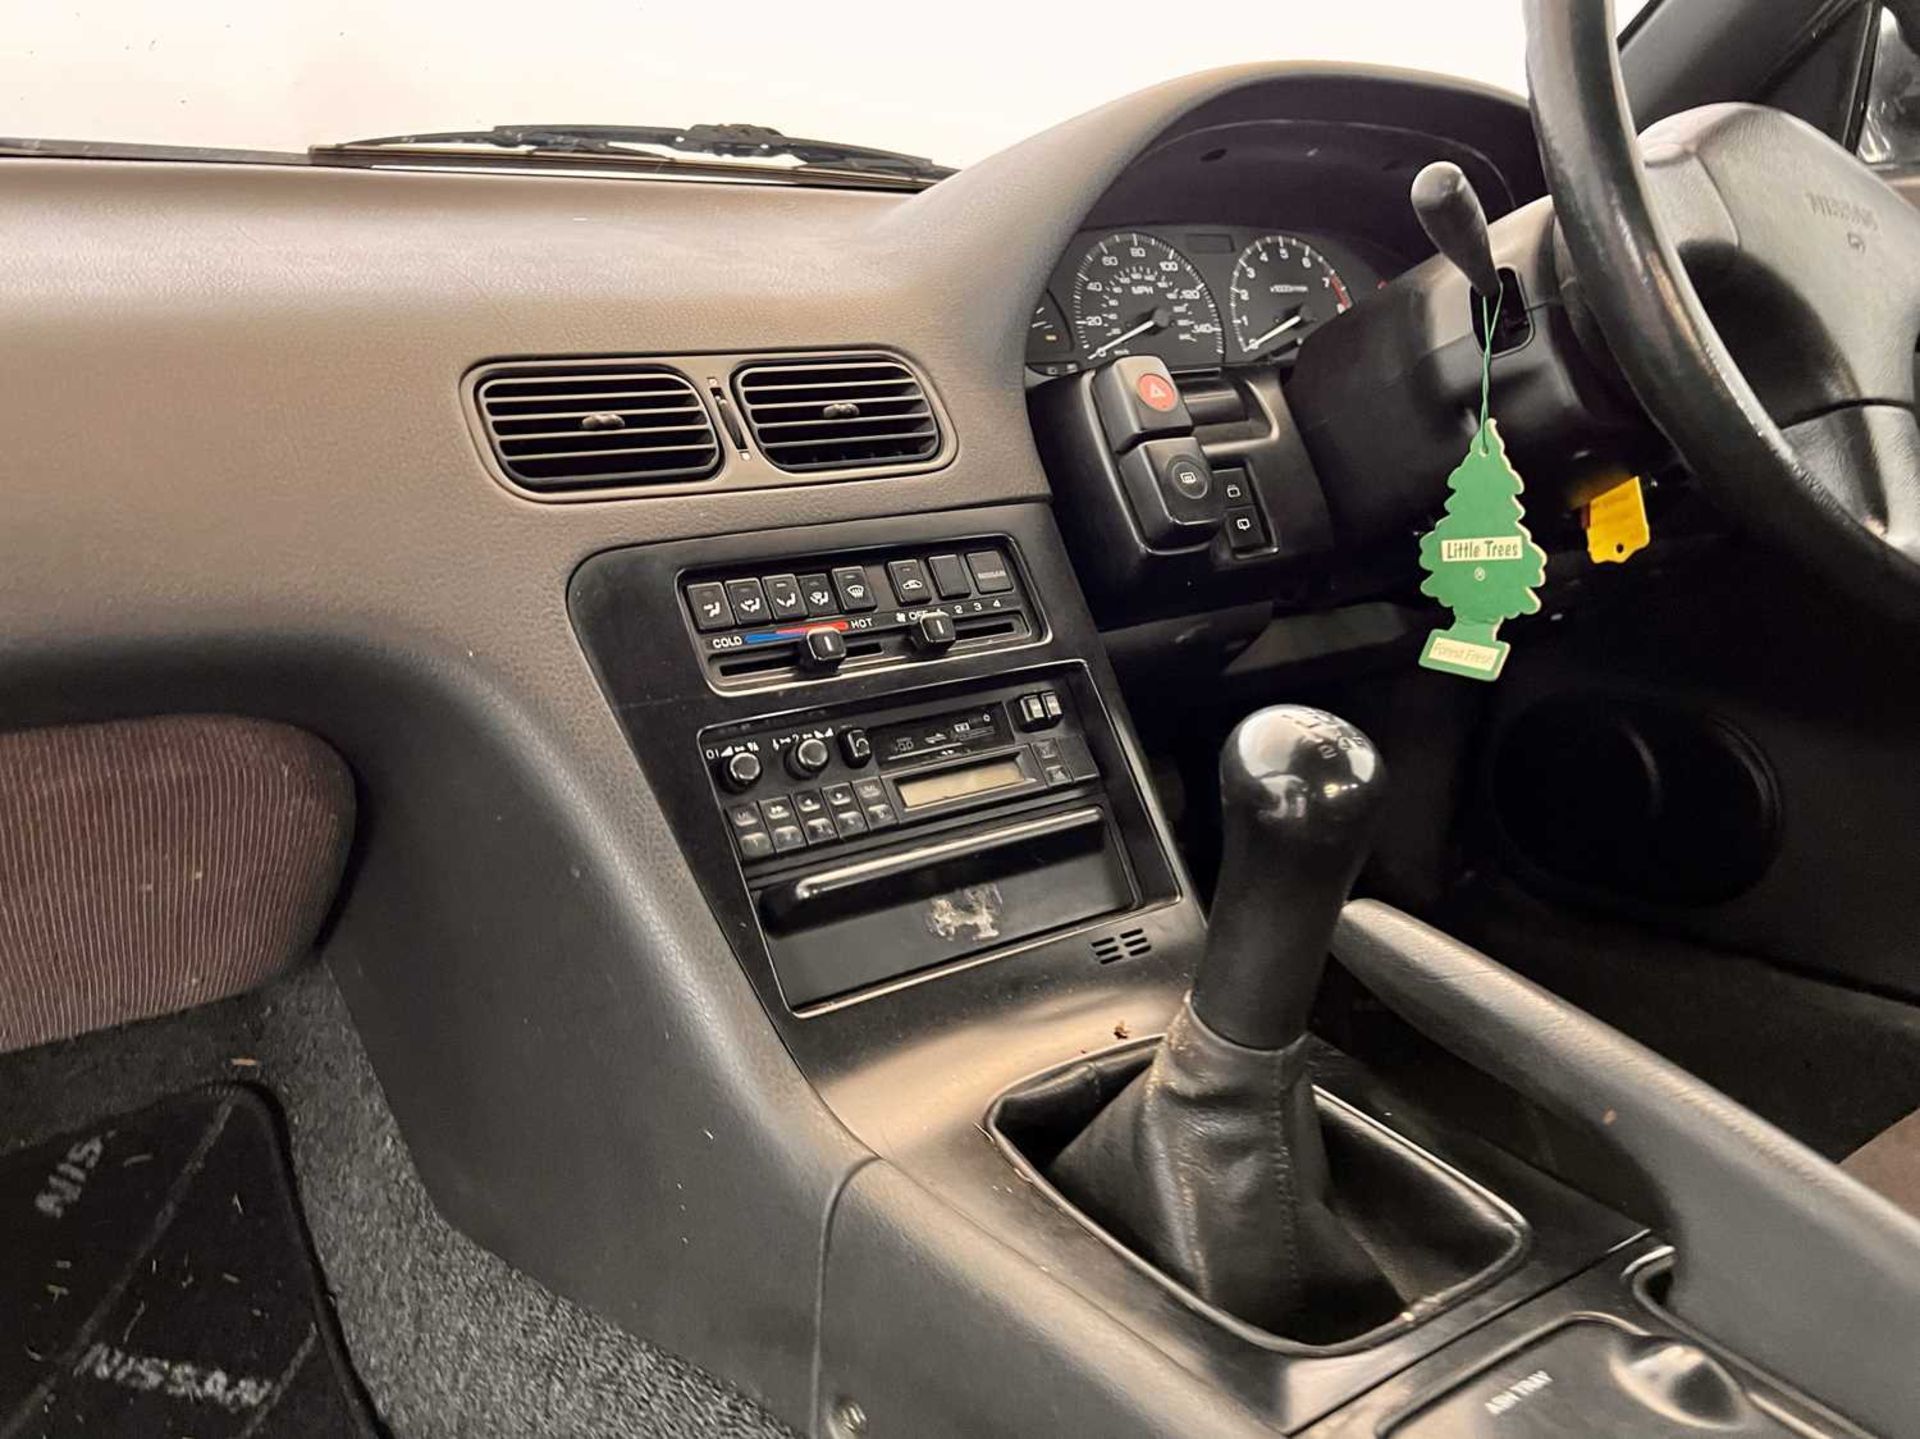 1990 Nissan 200SX - Image 25 of 30